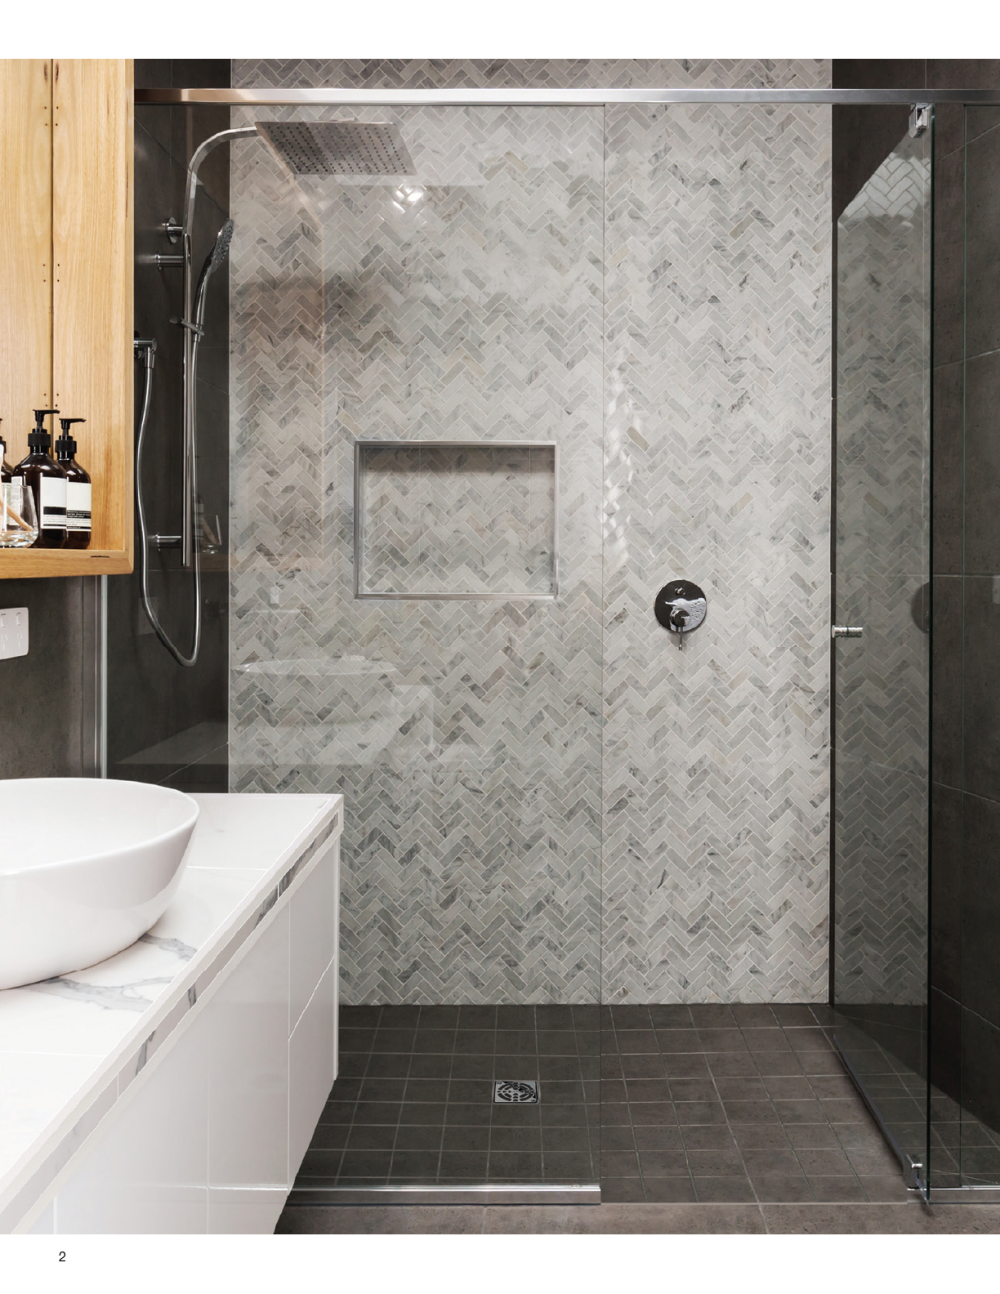 Curbless Shower System by Schluter.  Level entry grey floor shower surround in grey herringbone tile with glass door.